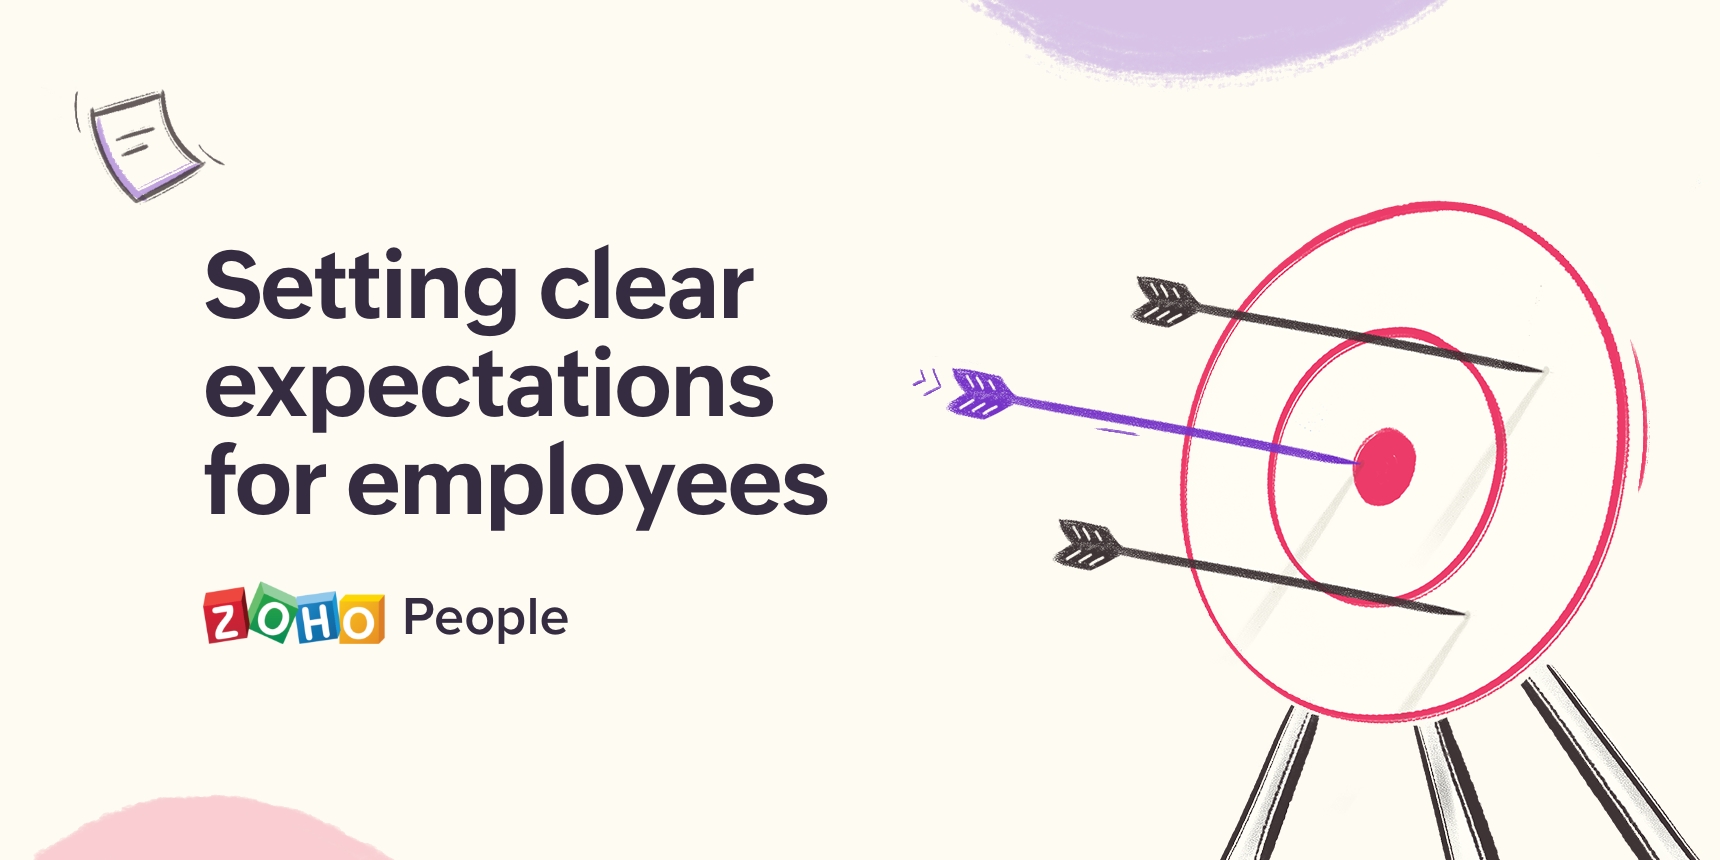 Tips to set clear expectations for employees